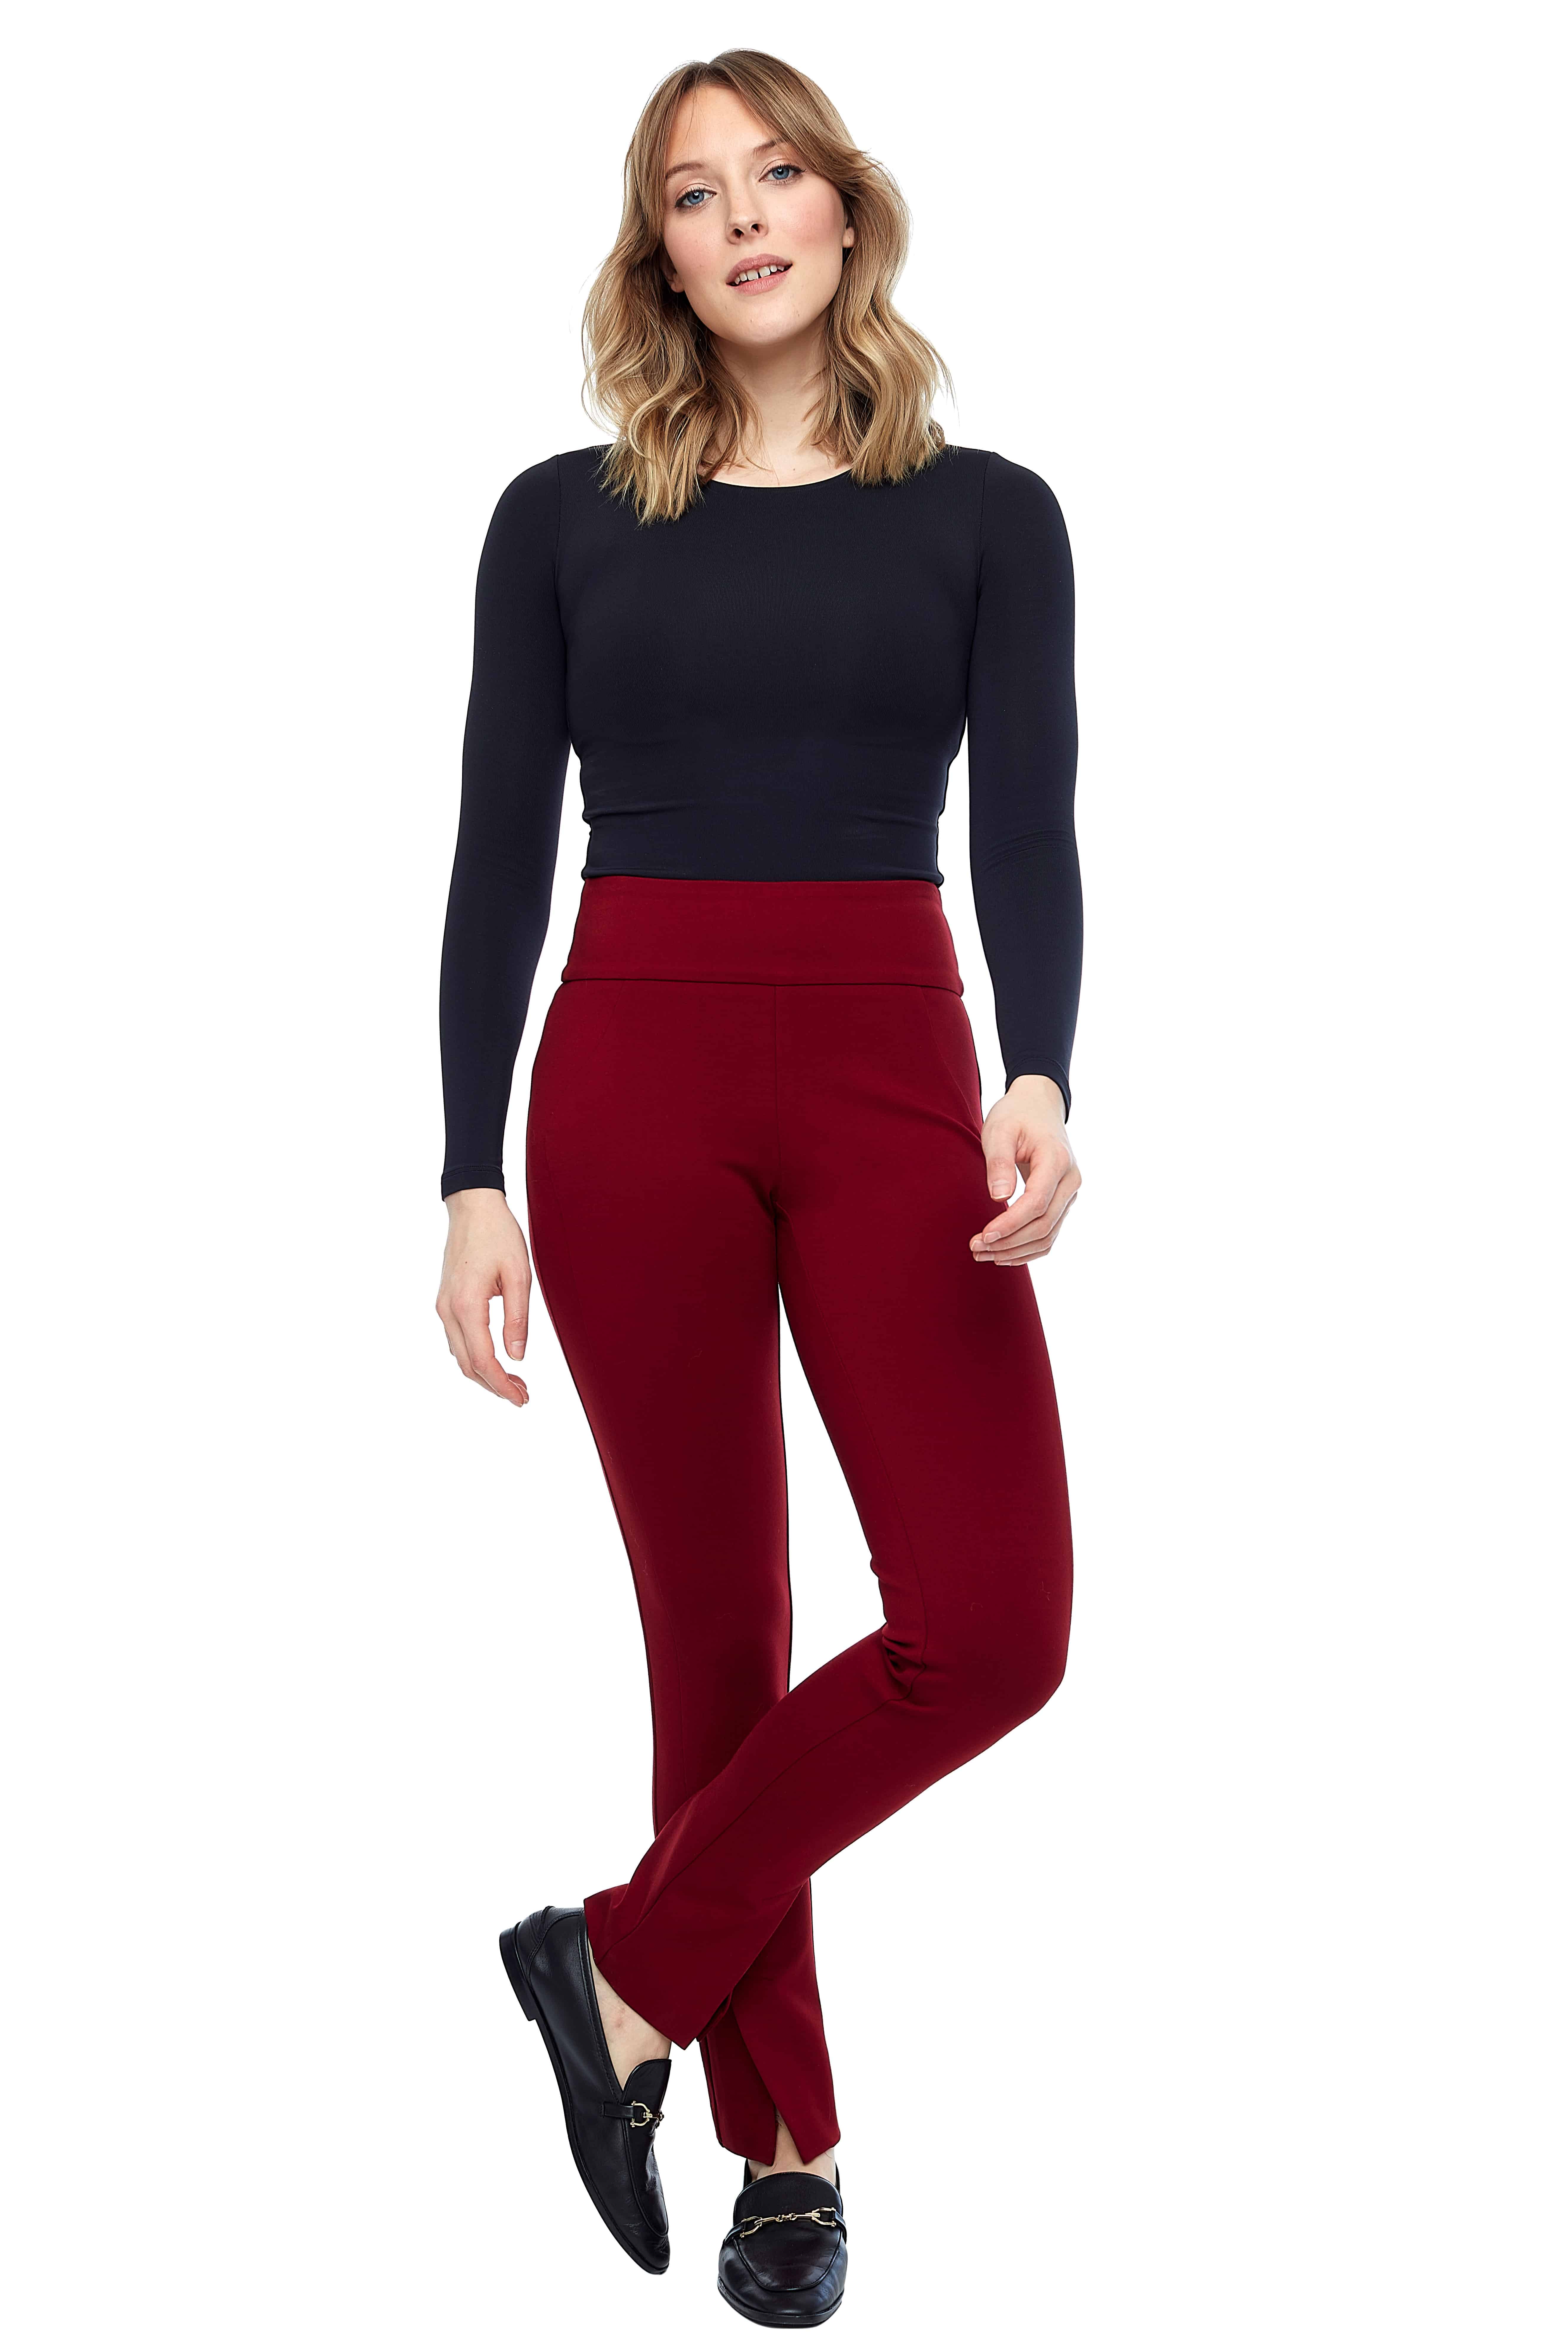 Pin Tuck Leggings with Slimming Waistband